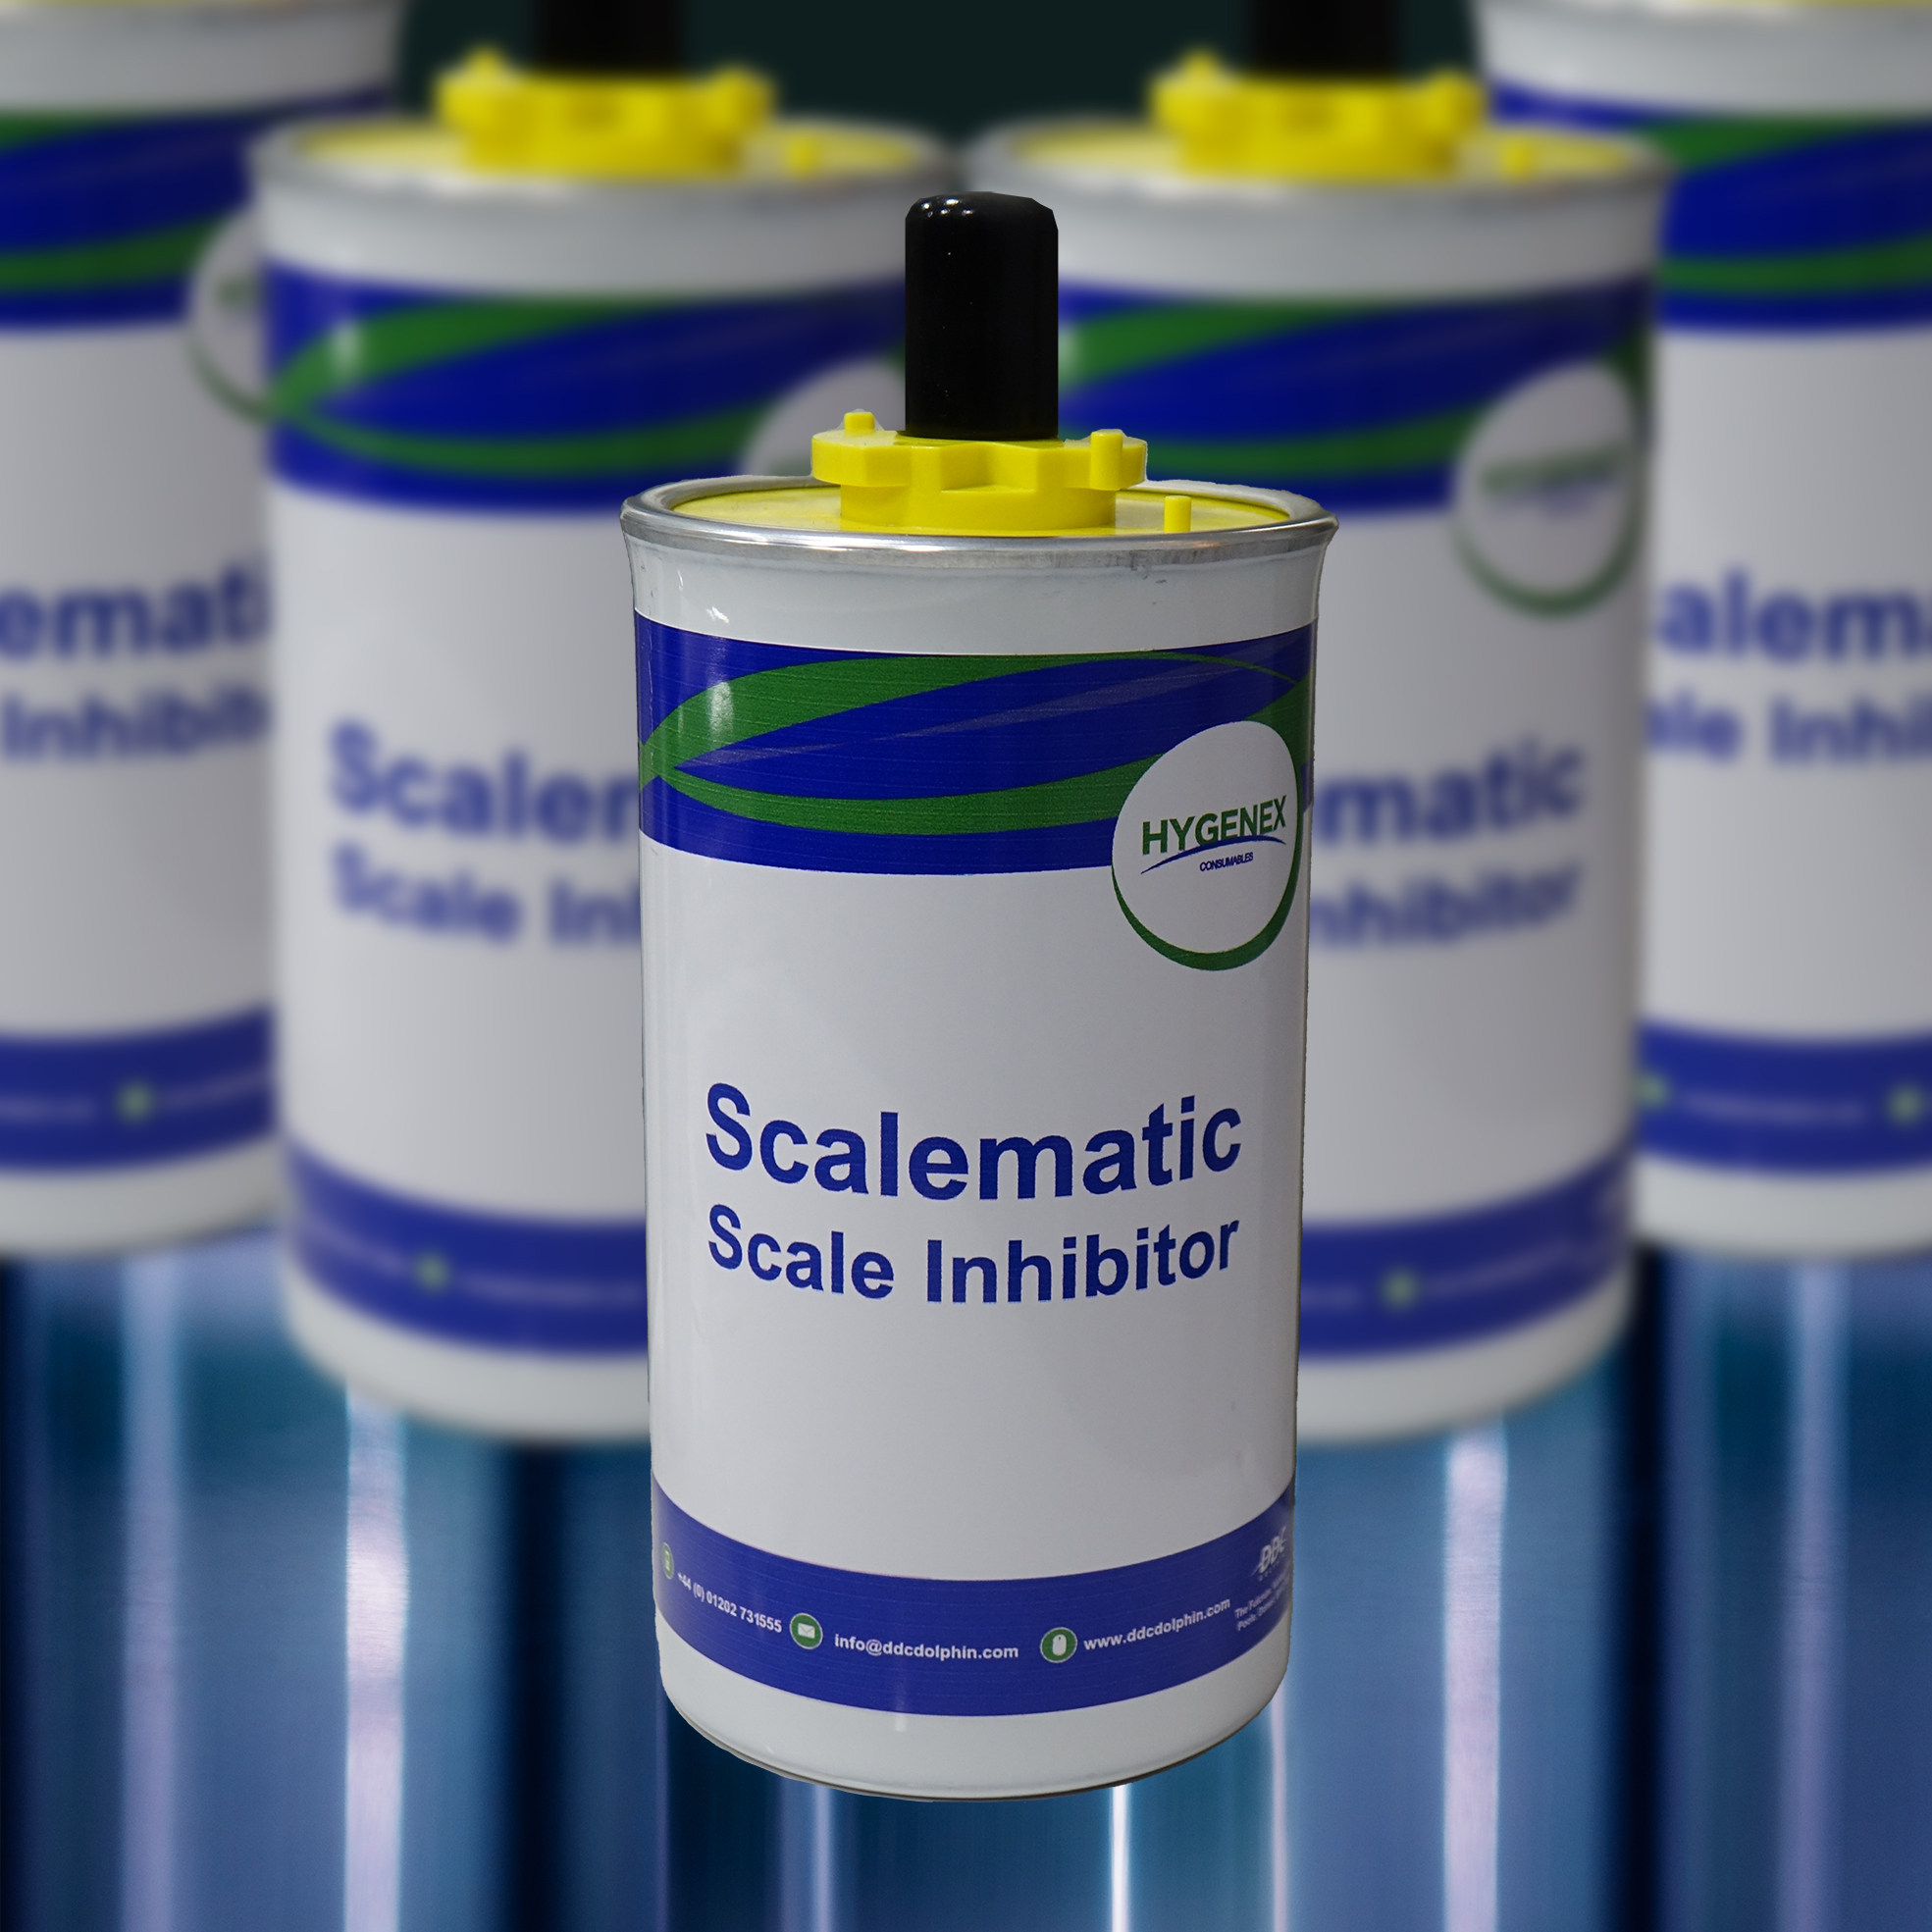 Scalematic Scale Inhibitor Cartridges